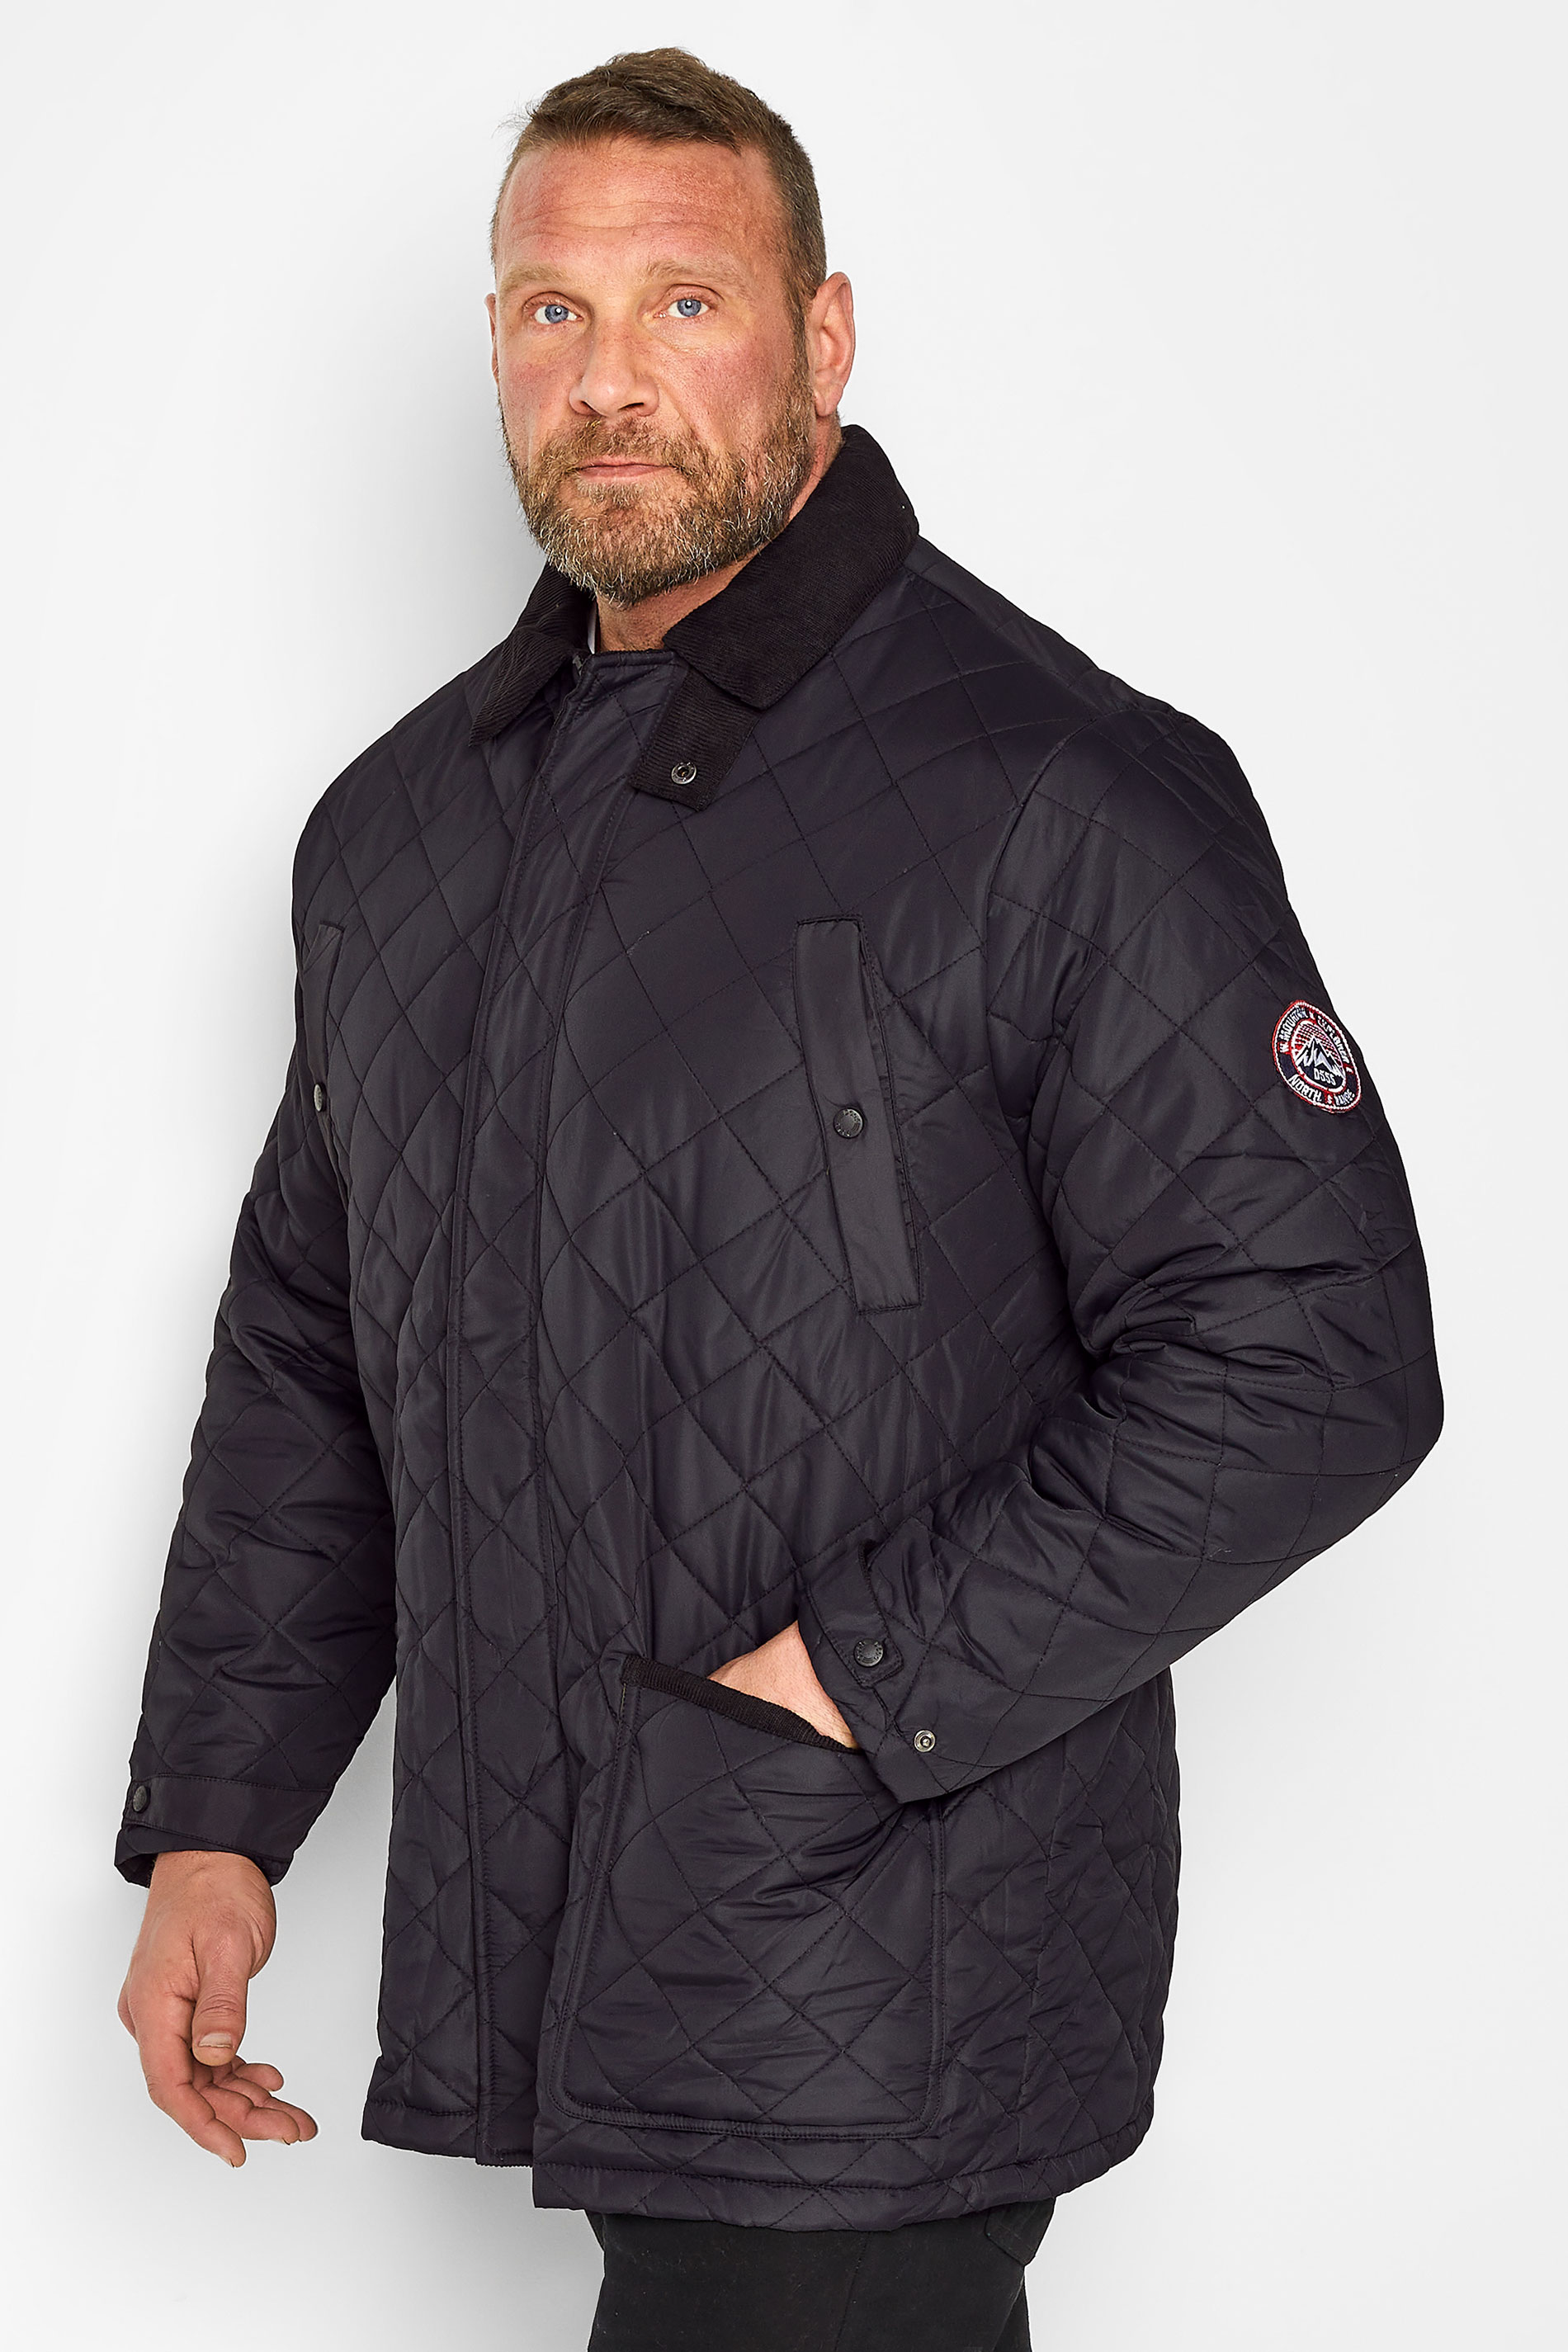 D555 Big & Tall Black Quilted Jacket | BadRhino 1